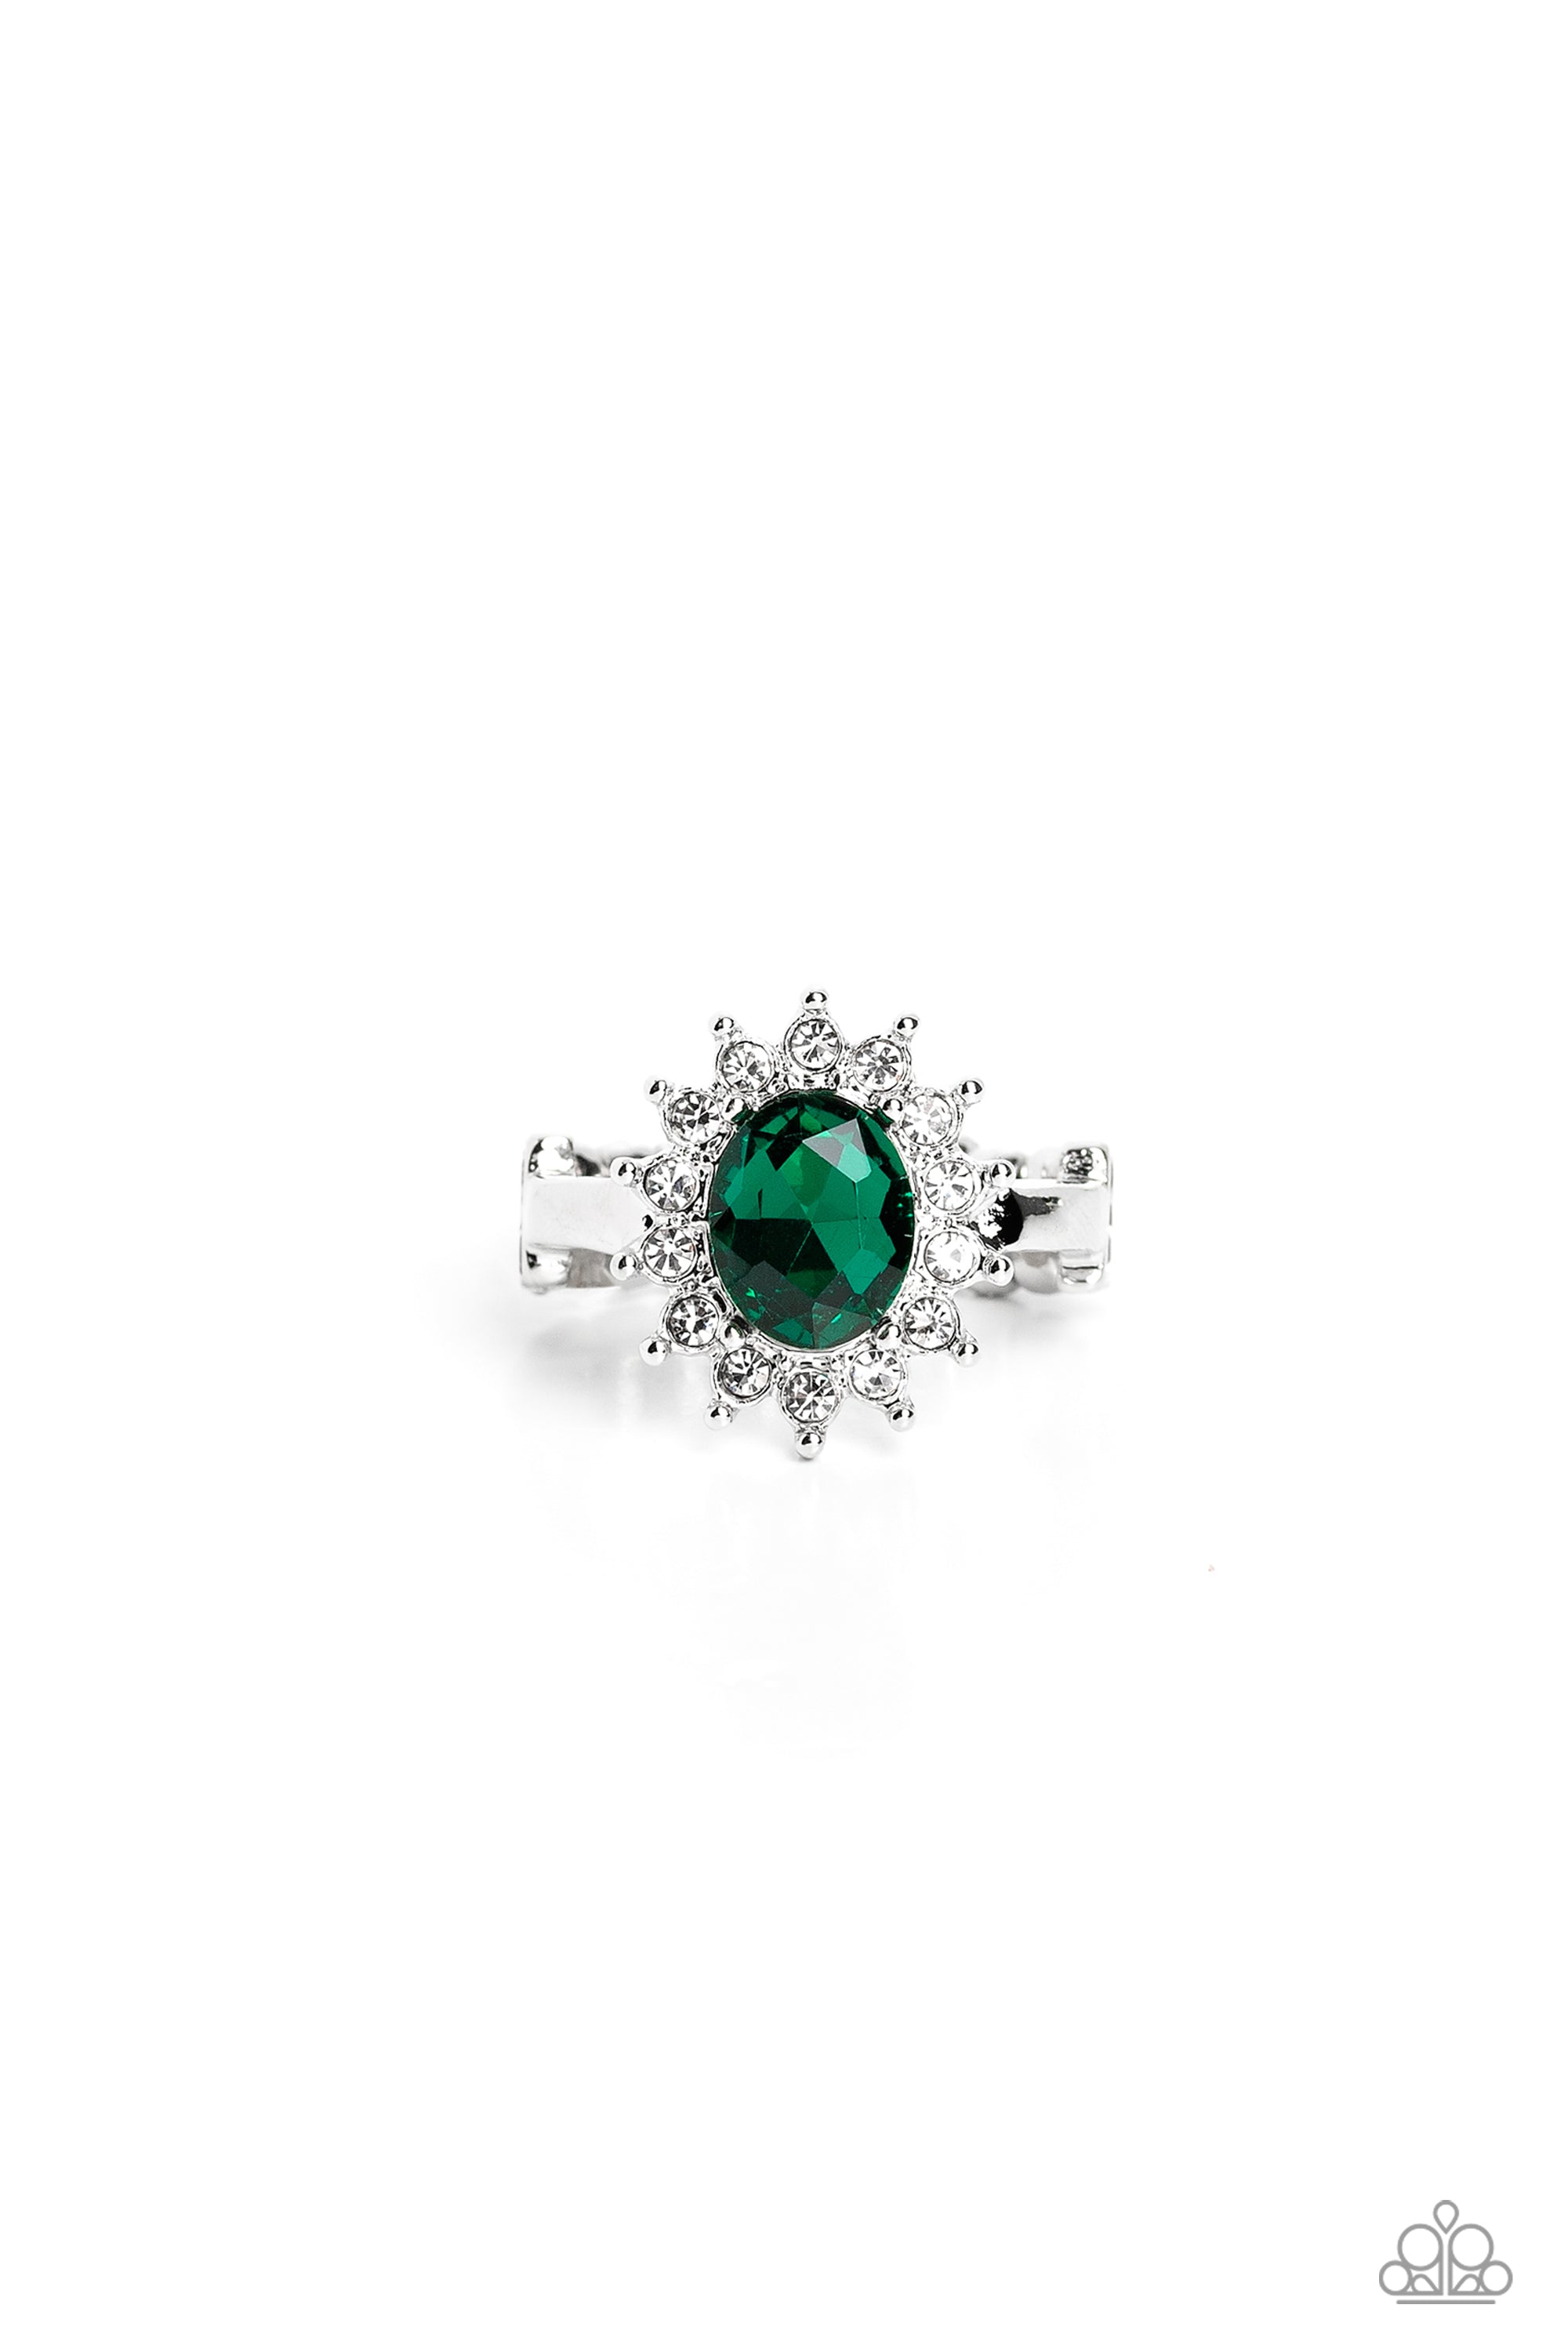 Red Carpet Reveal Green Rhinestone Ring - Paparazzi Accessories- lightbox - CarasShop.com - $5 Jewelry by Cara Jewels